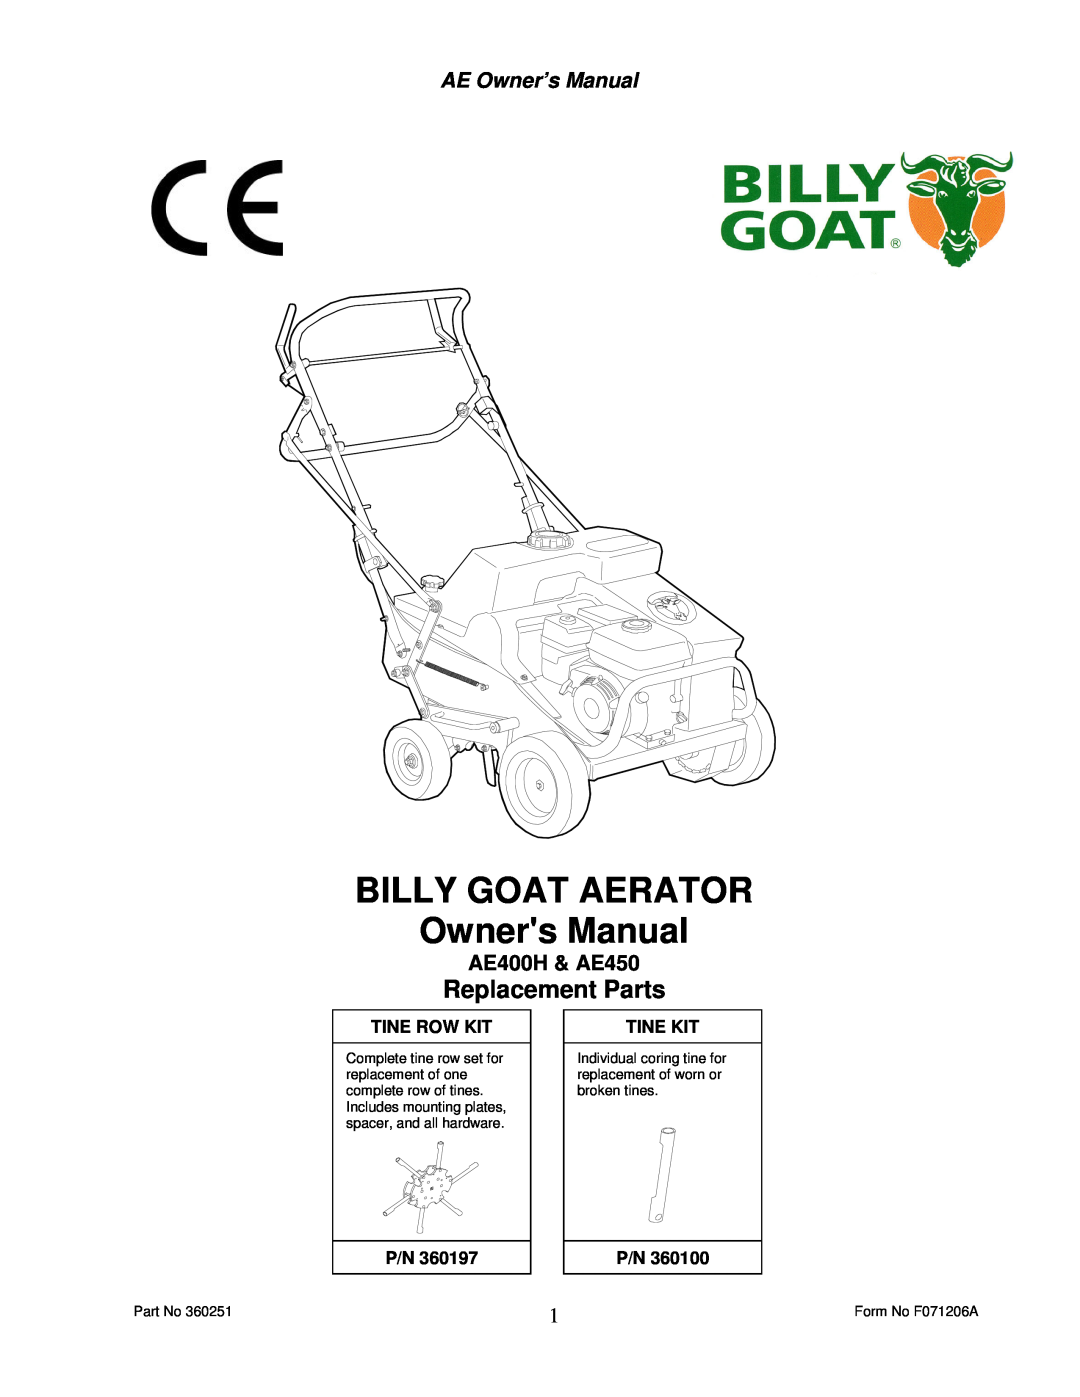 Billy Goat AE400H, AE450 owner manual Replacement Parts, AE400H & AE450, Tine Row Kit, Tine Kit 